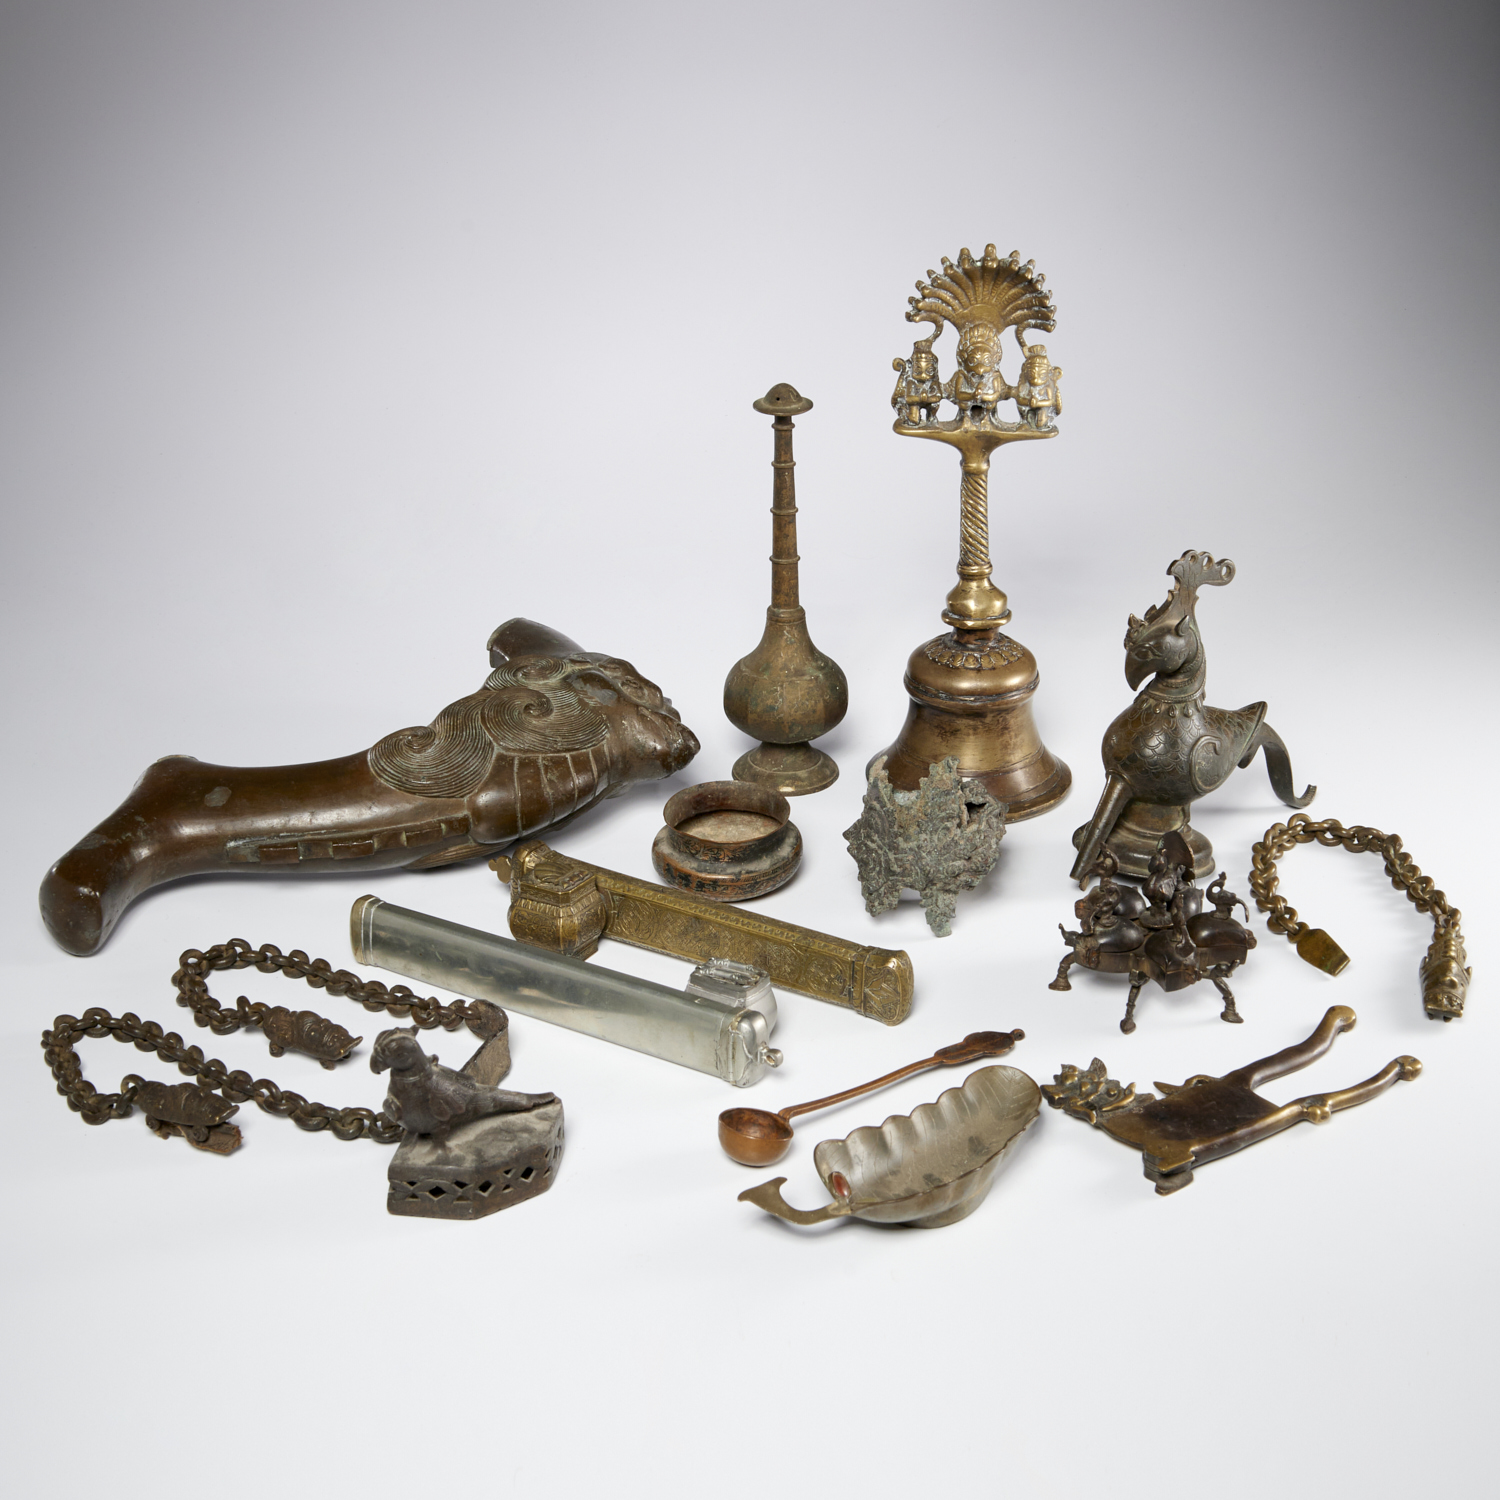 ASIAN AND MIDDLE-EASTERN METALWARE